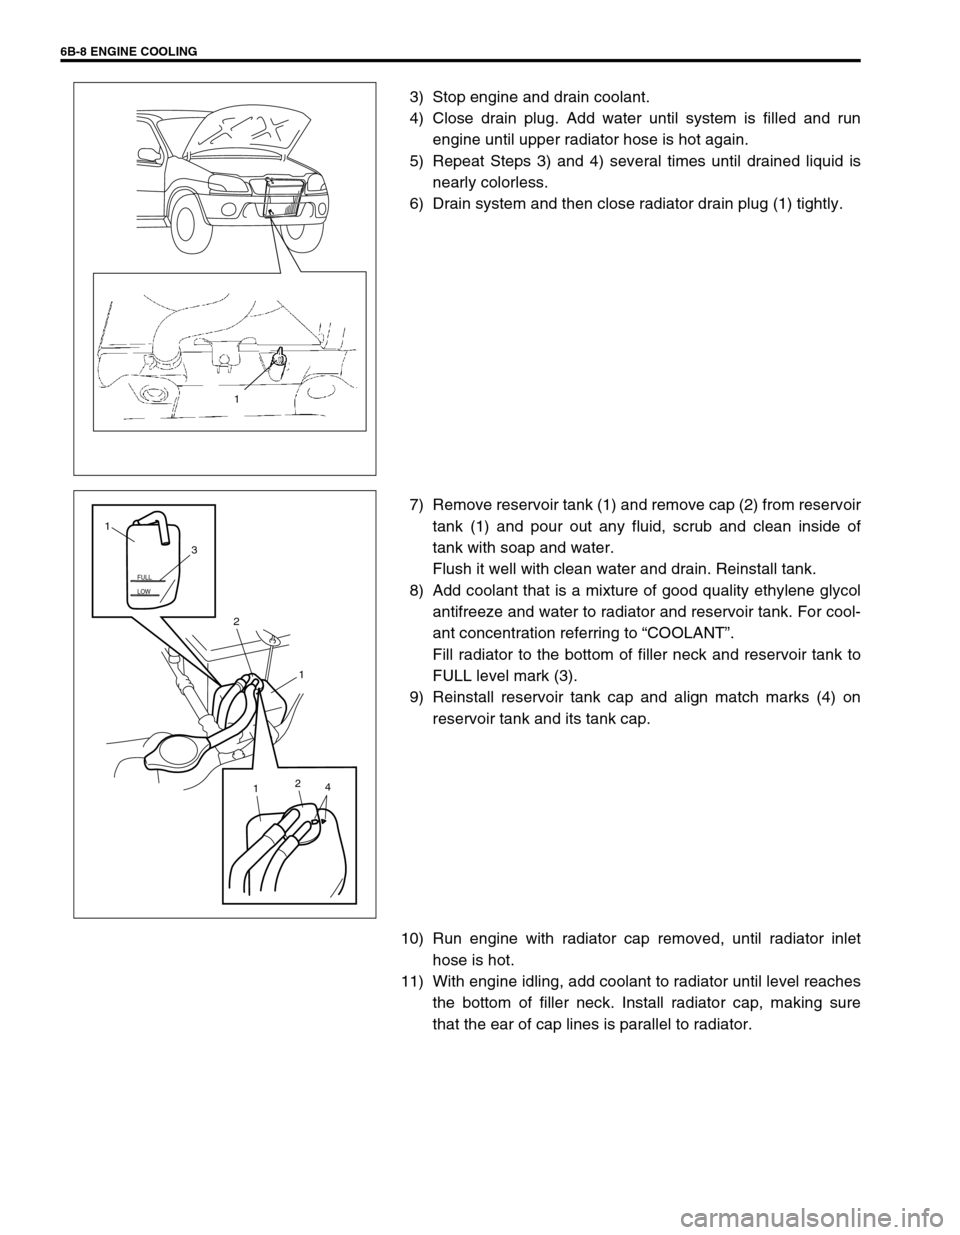 SUZUKI SWIFT 2000 1.G RG413 Service Service Manual 6B-8 ENGINE COOLING
3) Stop engine and drain coolant.
4) Close drain plug. Add water until system is filled and run
engine until upper radiator hose is hot again.
5) Repeat Steps 3) and 4) several tim